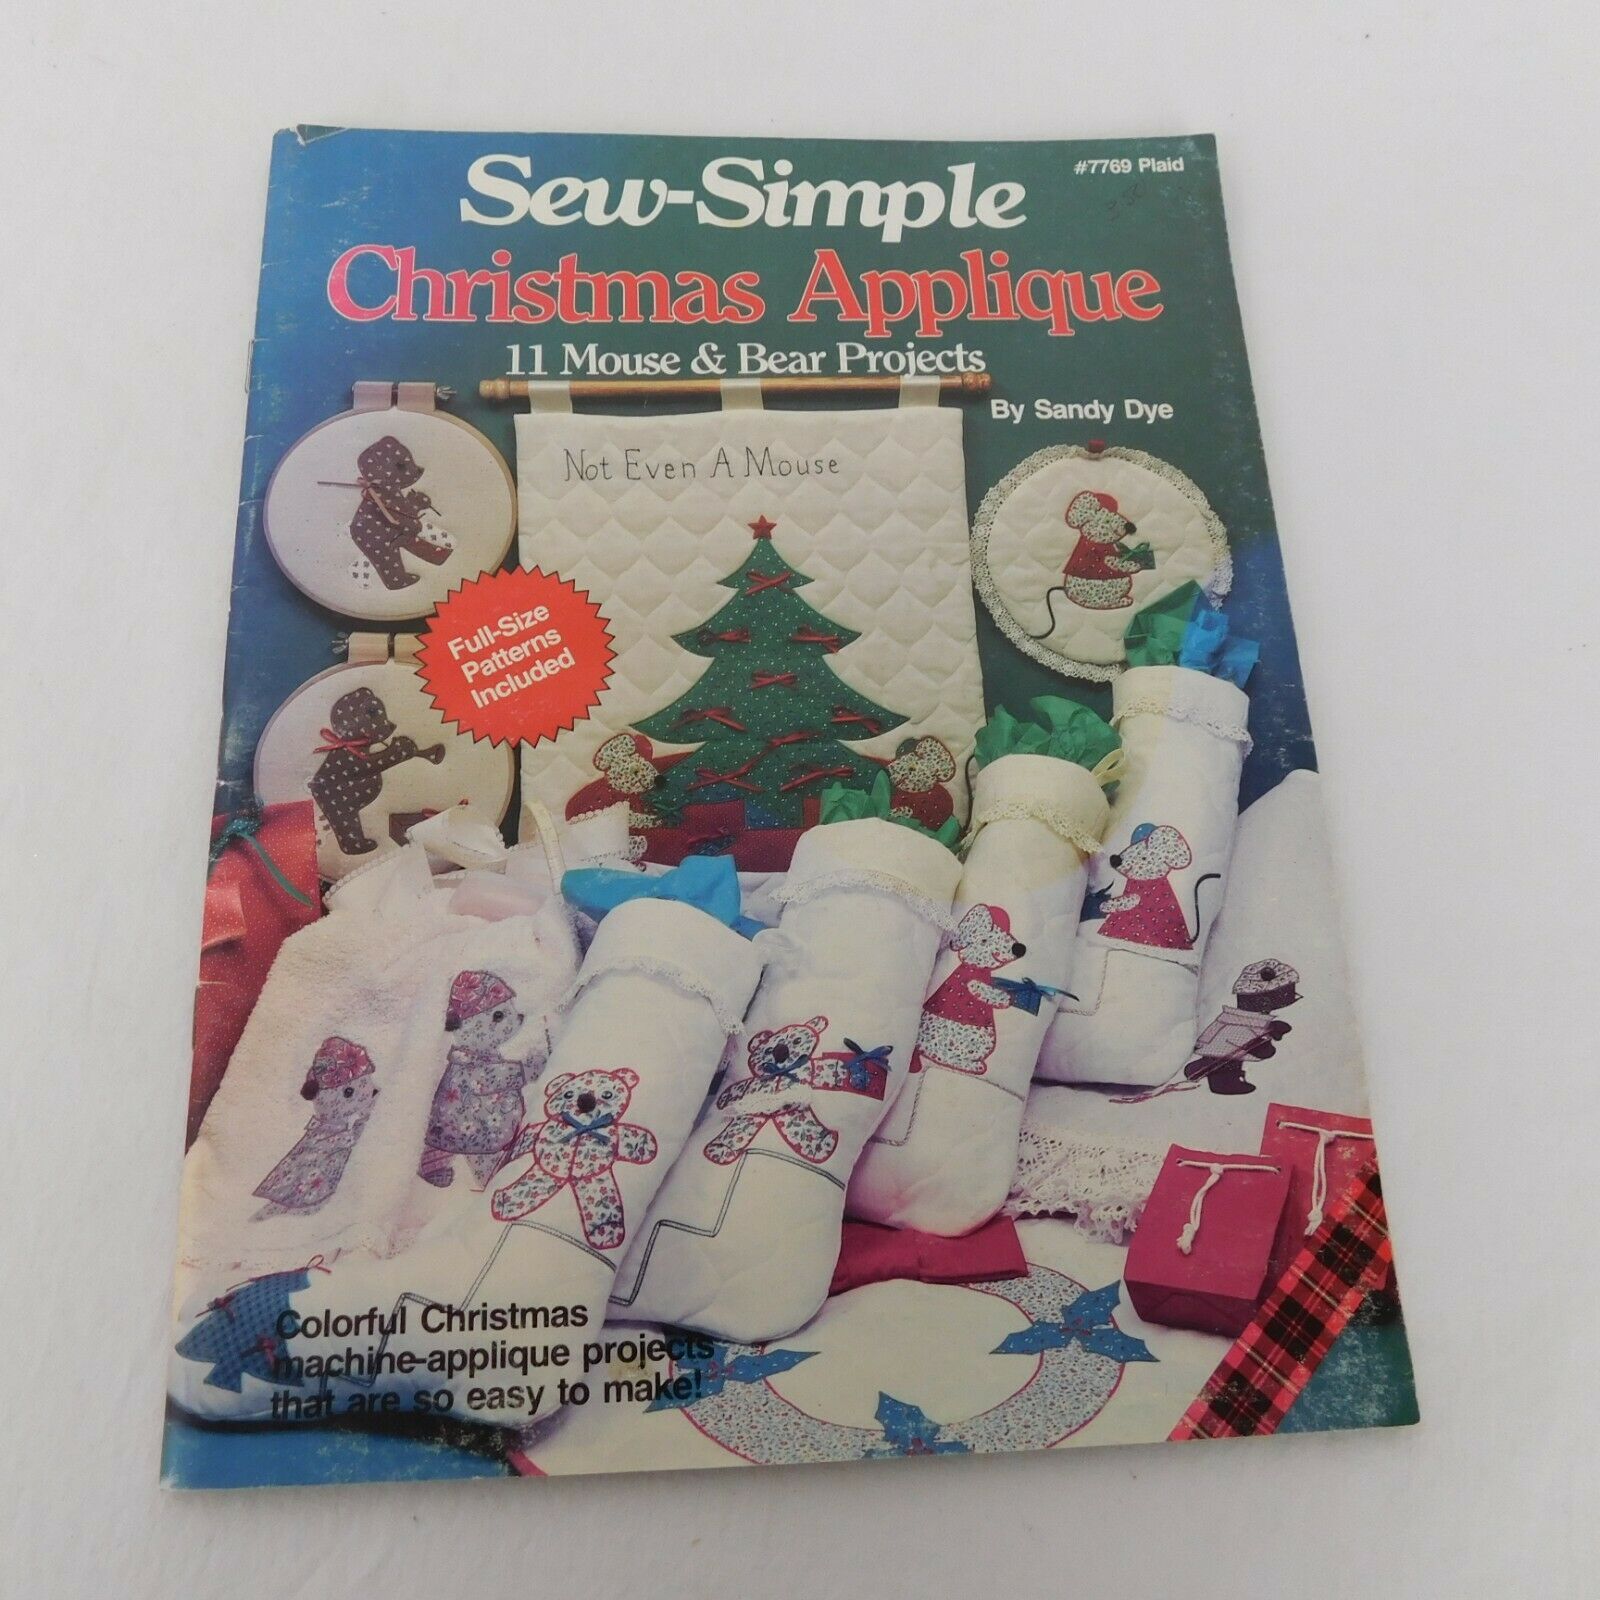 Plaid Sew-Simple Christmas Applique Booklet with 11 Mouse & Bear Projects Uncut - $5.95